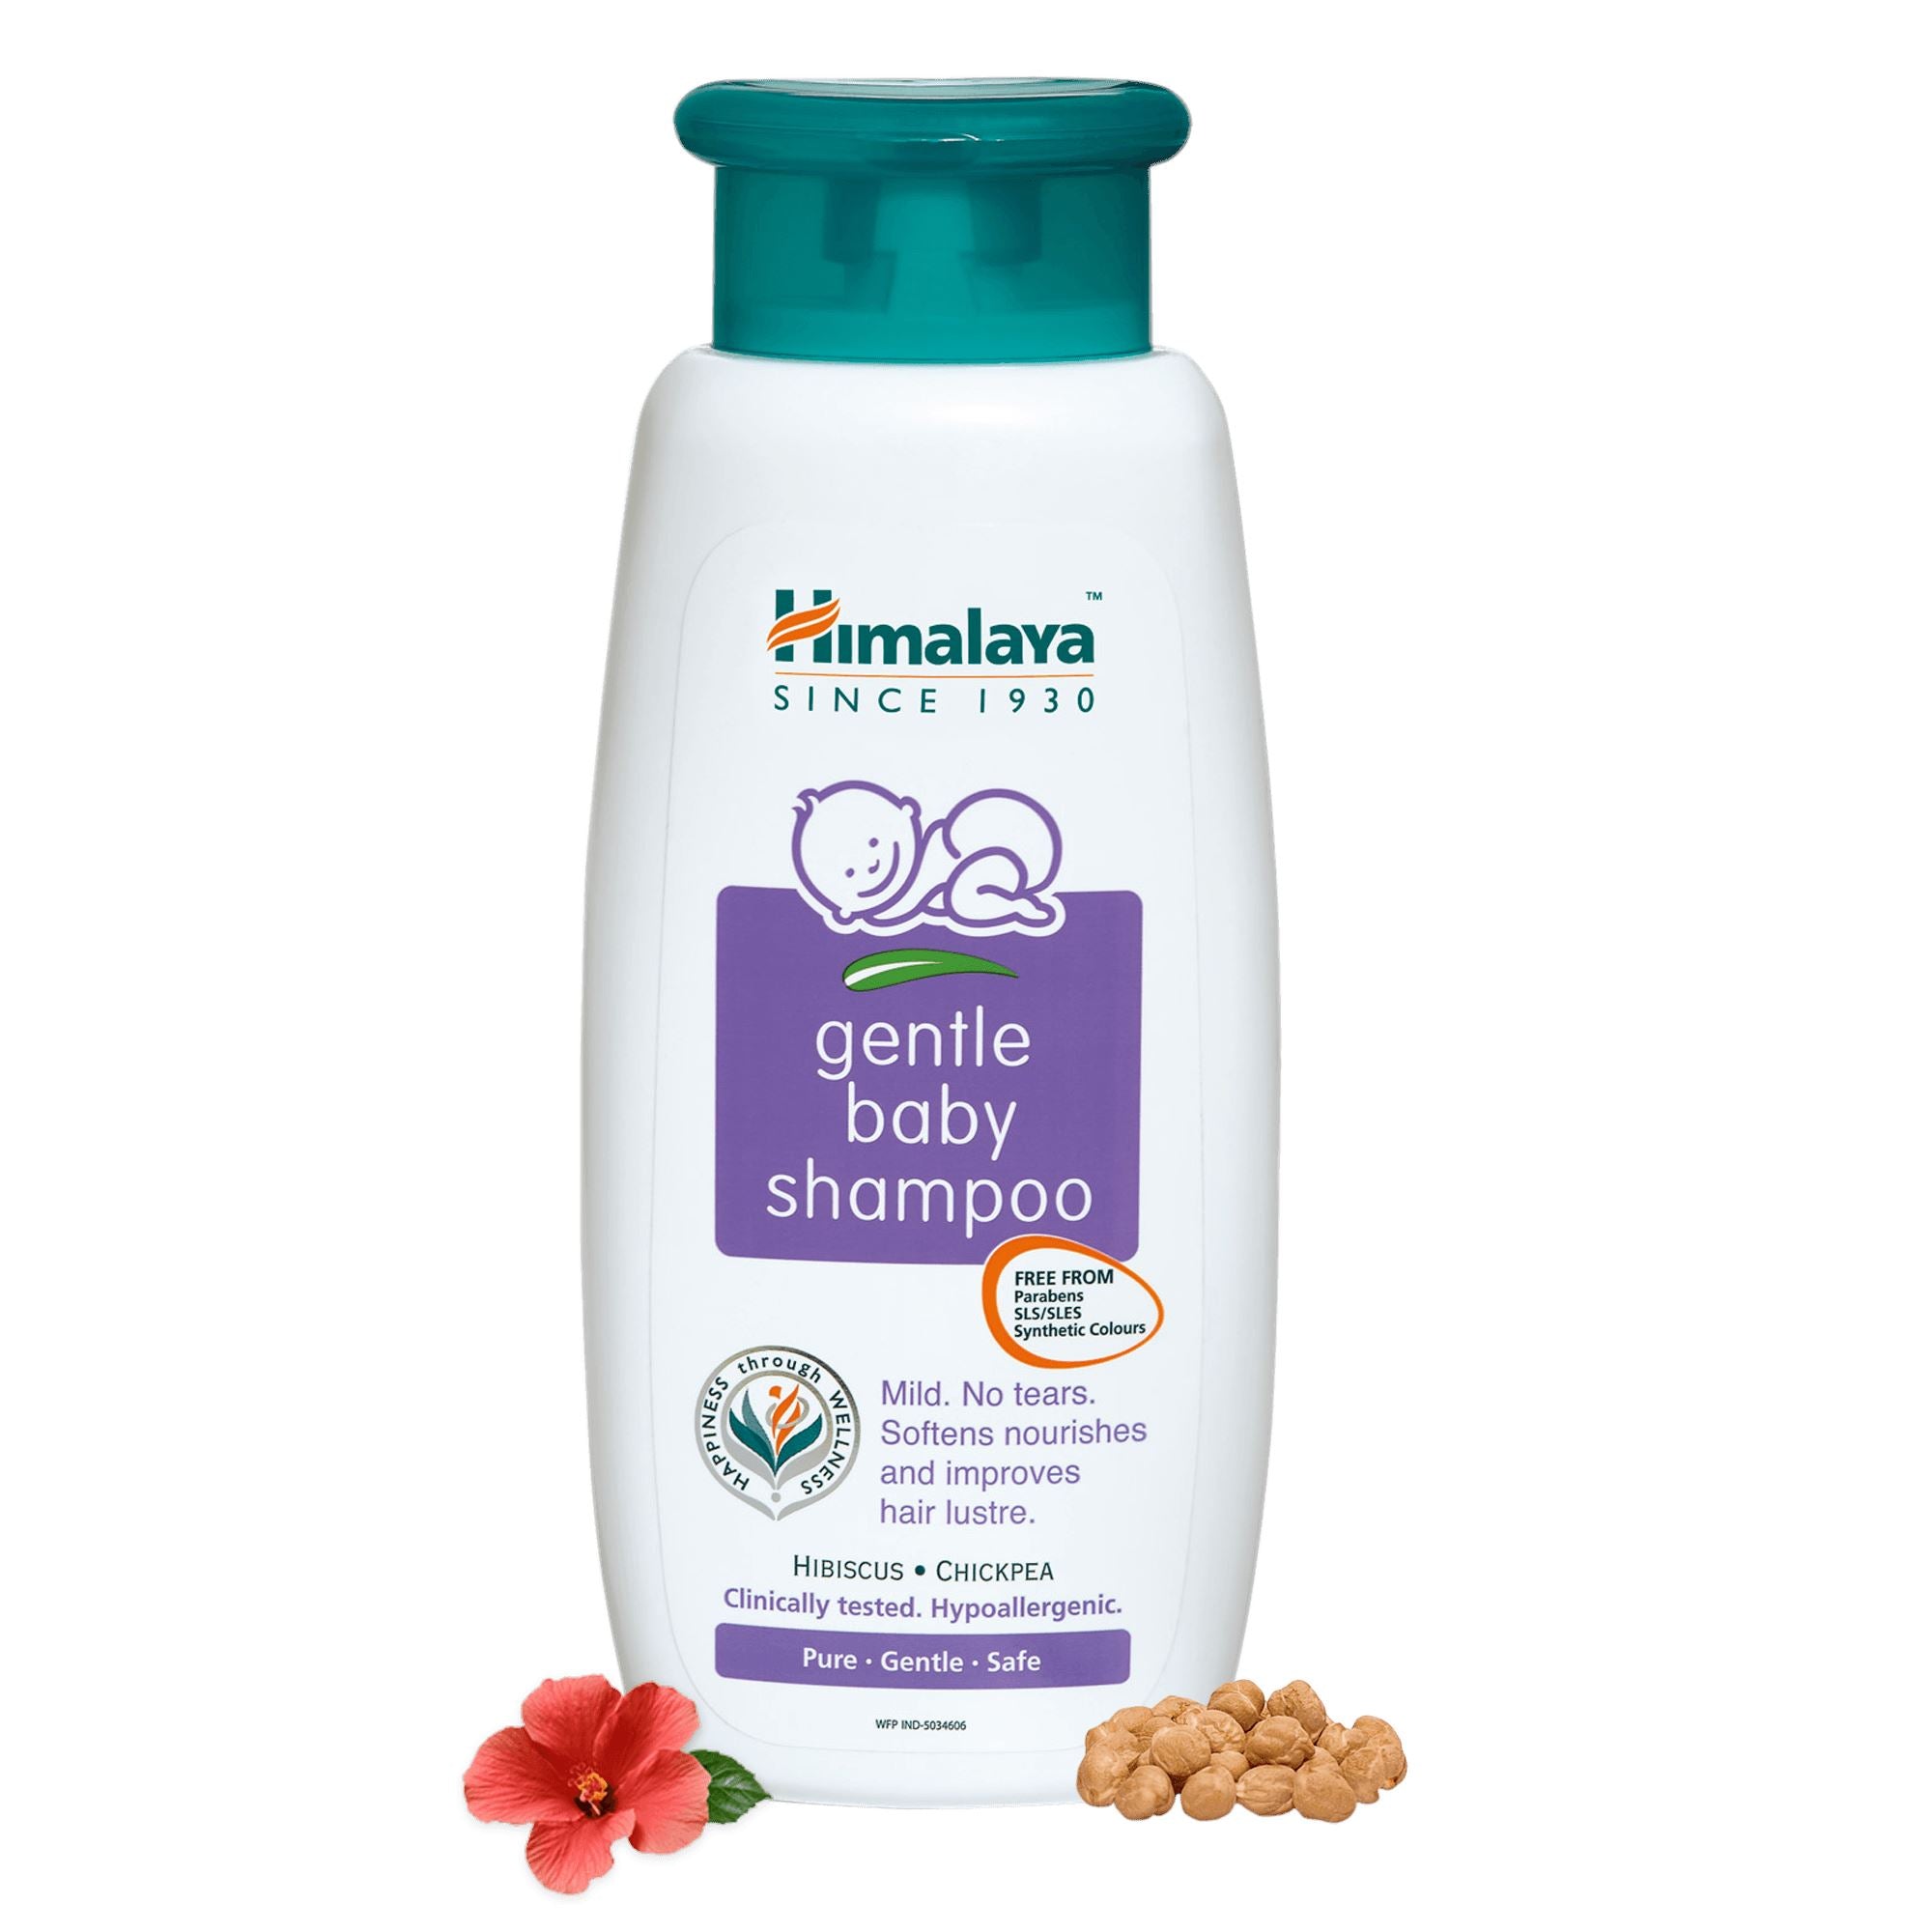 Himalaya Gentle Baby Shampoo - Gently cleanses hair making it soft, shiny, and easy to manage